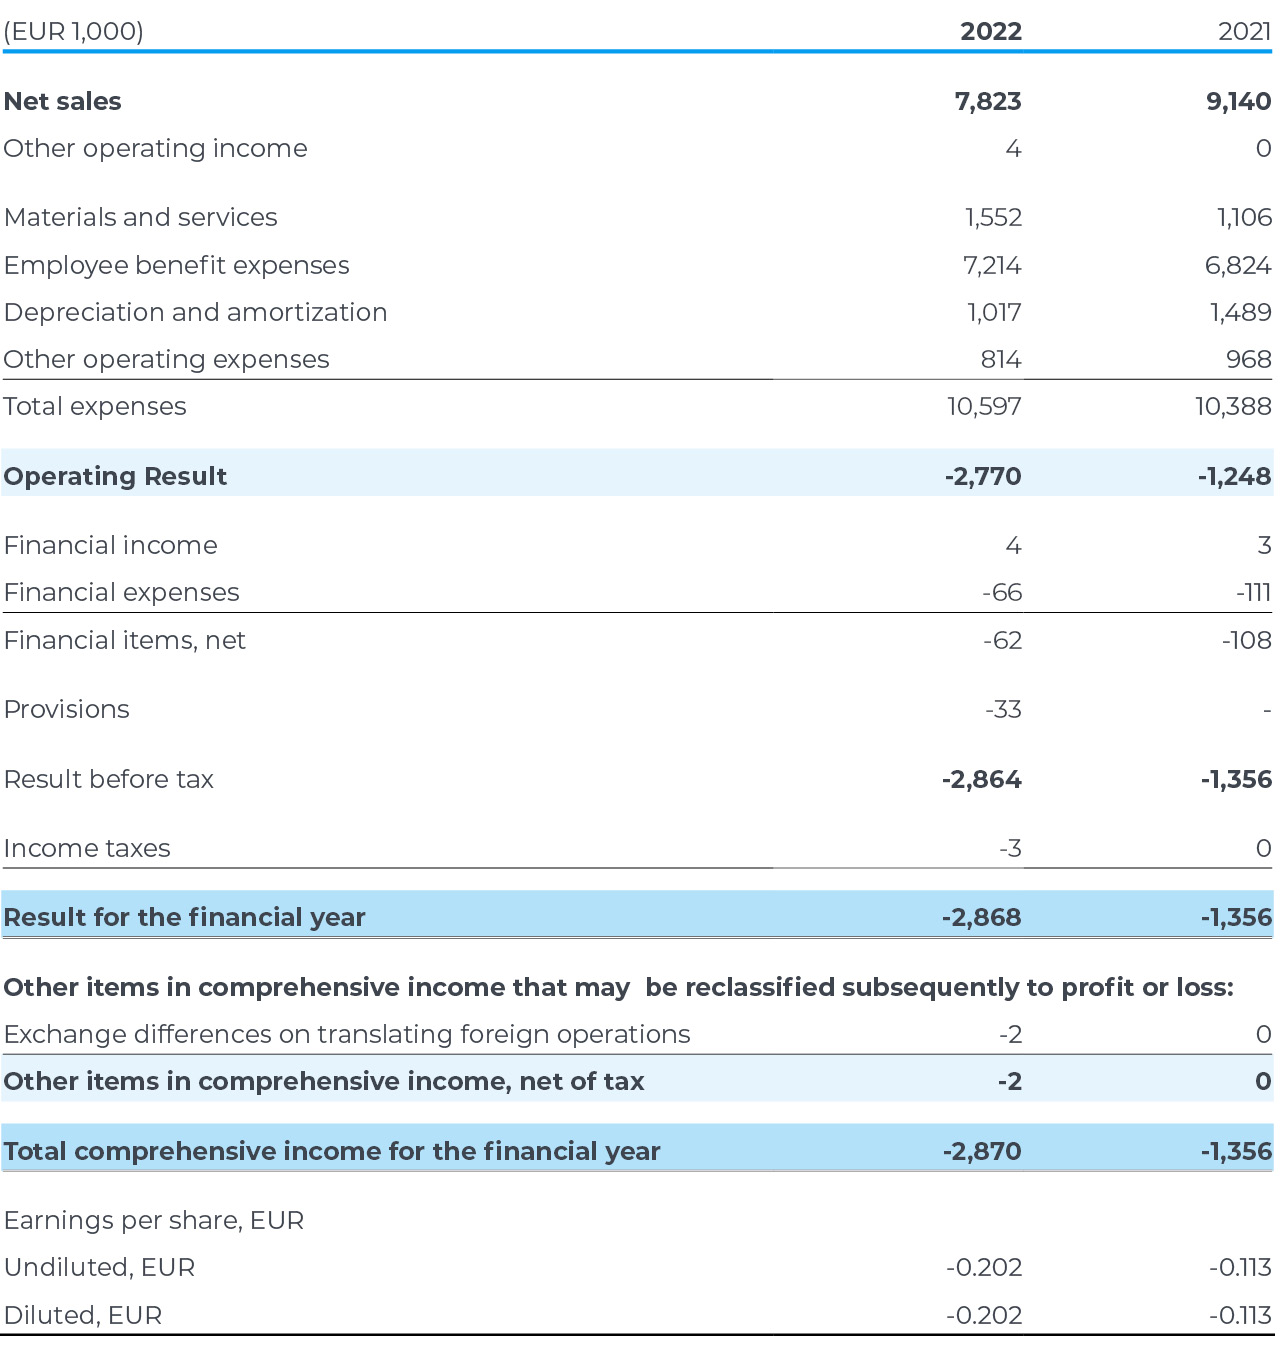 Consolidated Comprehensive Income Statement (IFRS)